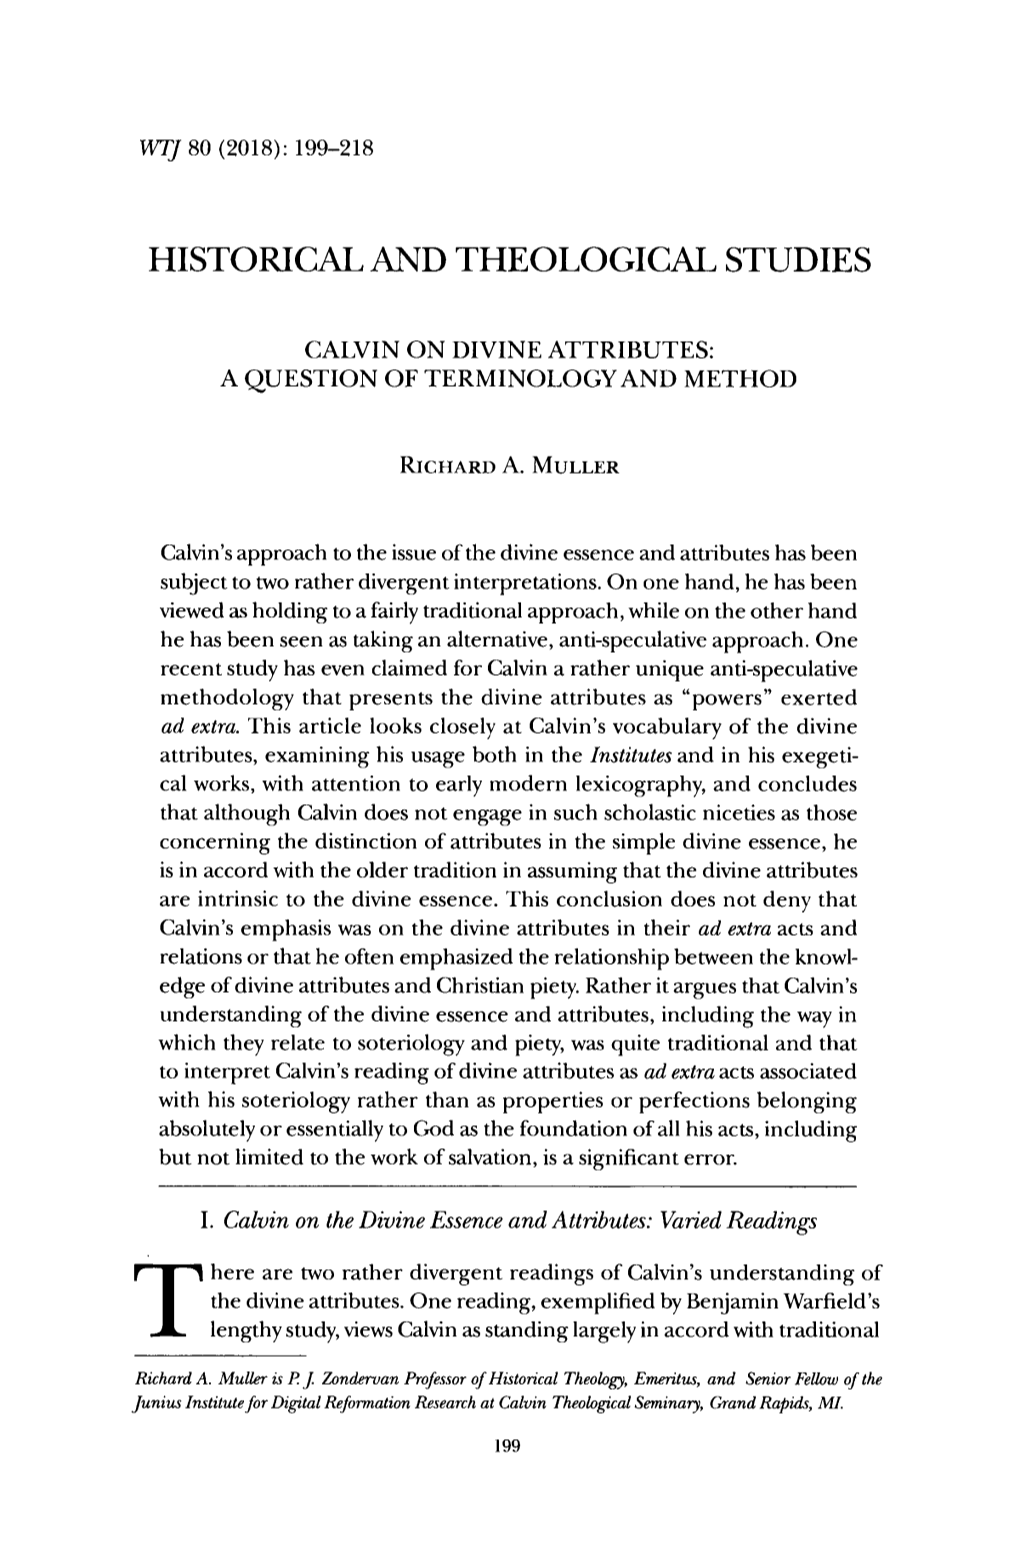 Calvin on Divine Attributes: a Question of Terminology and Method